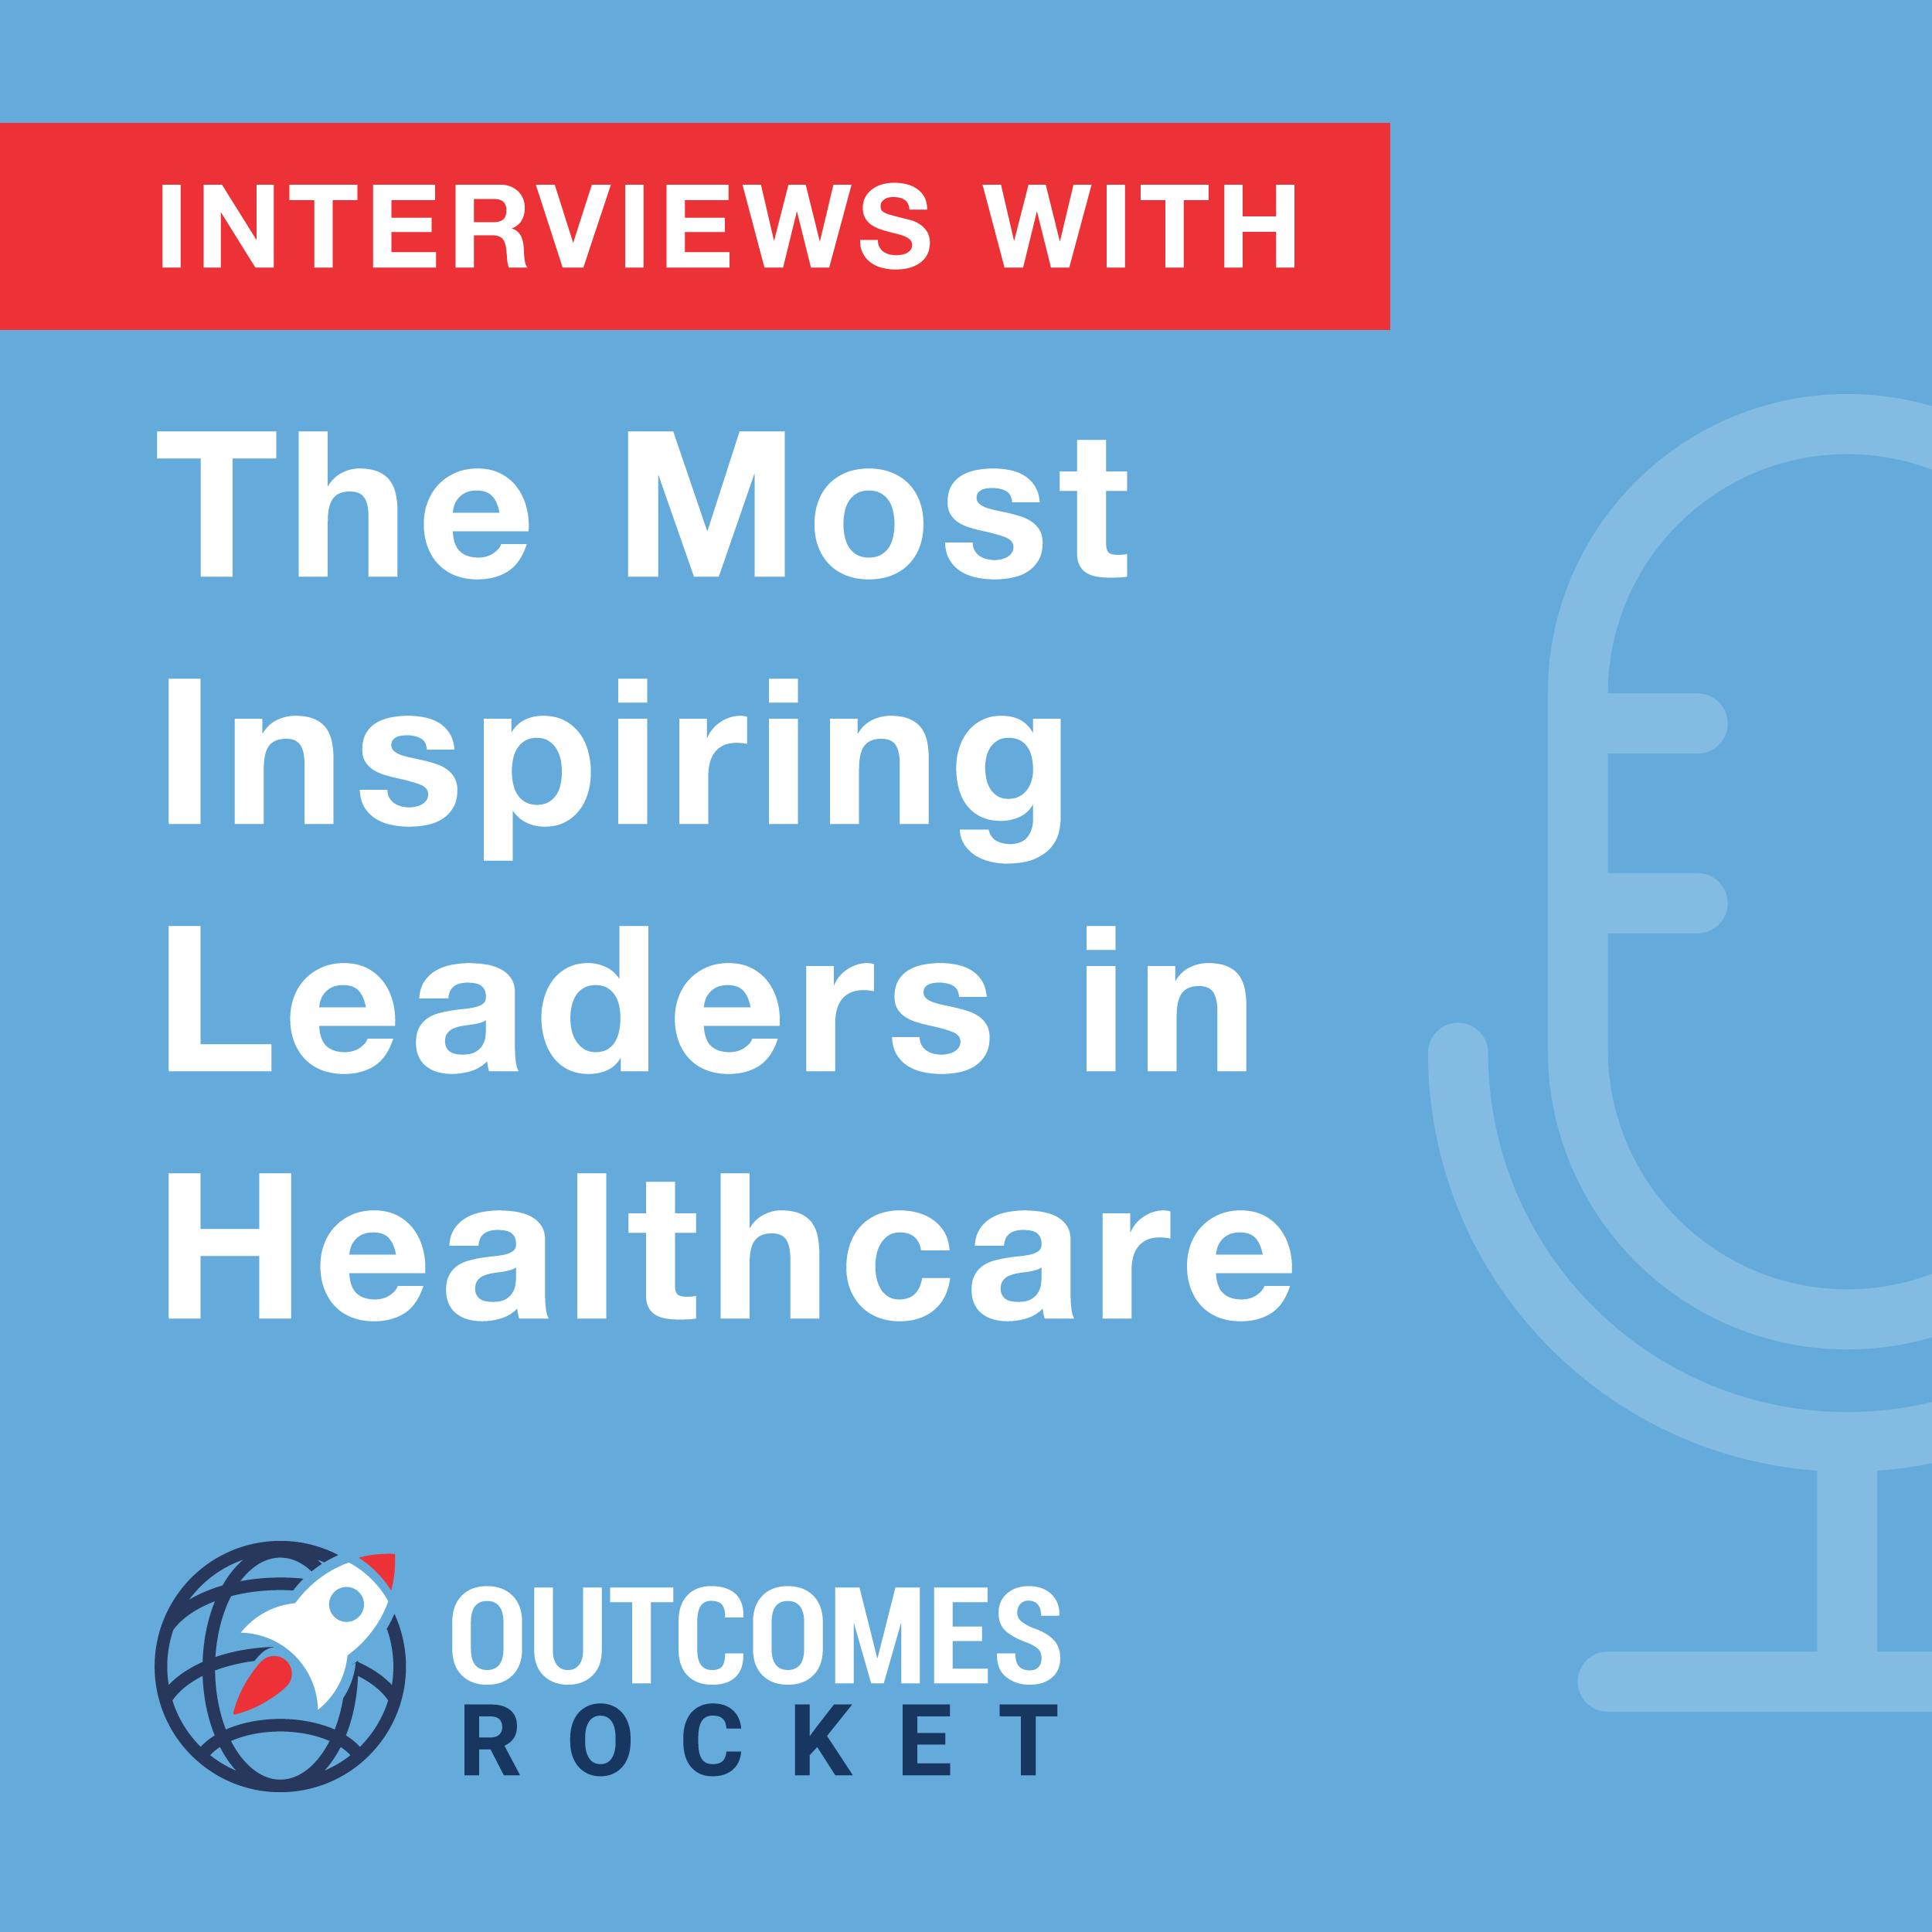 How to Improve Operations and Outcomes by Considering Human Factors with Dr. C. Adam Probst, Director of Human Factors Clinical Operations at Baylor Scott & White Health